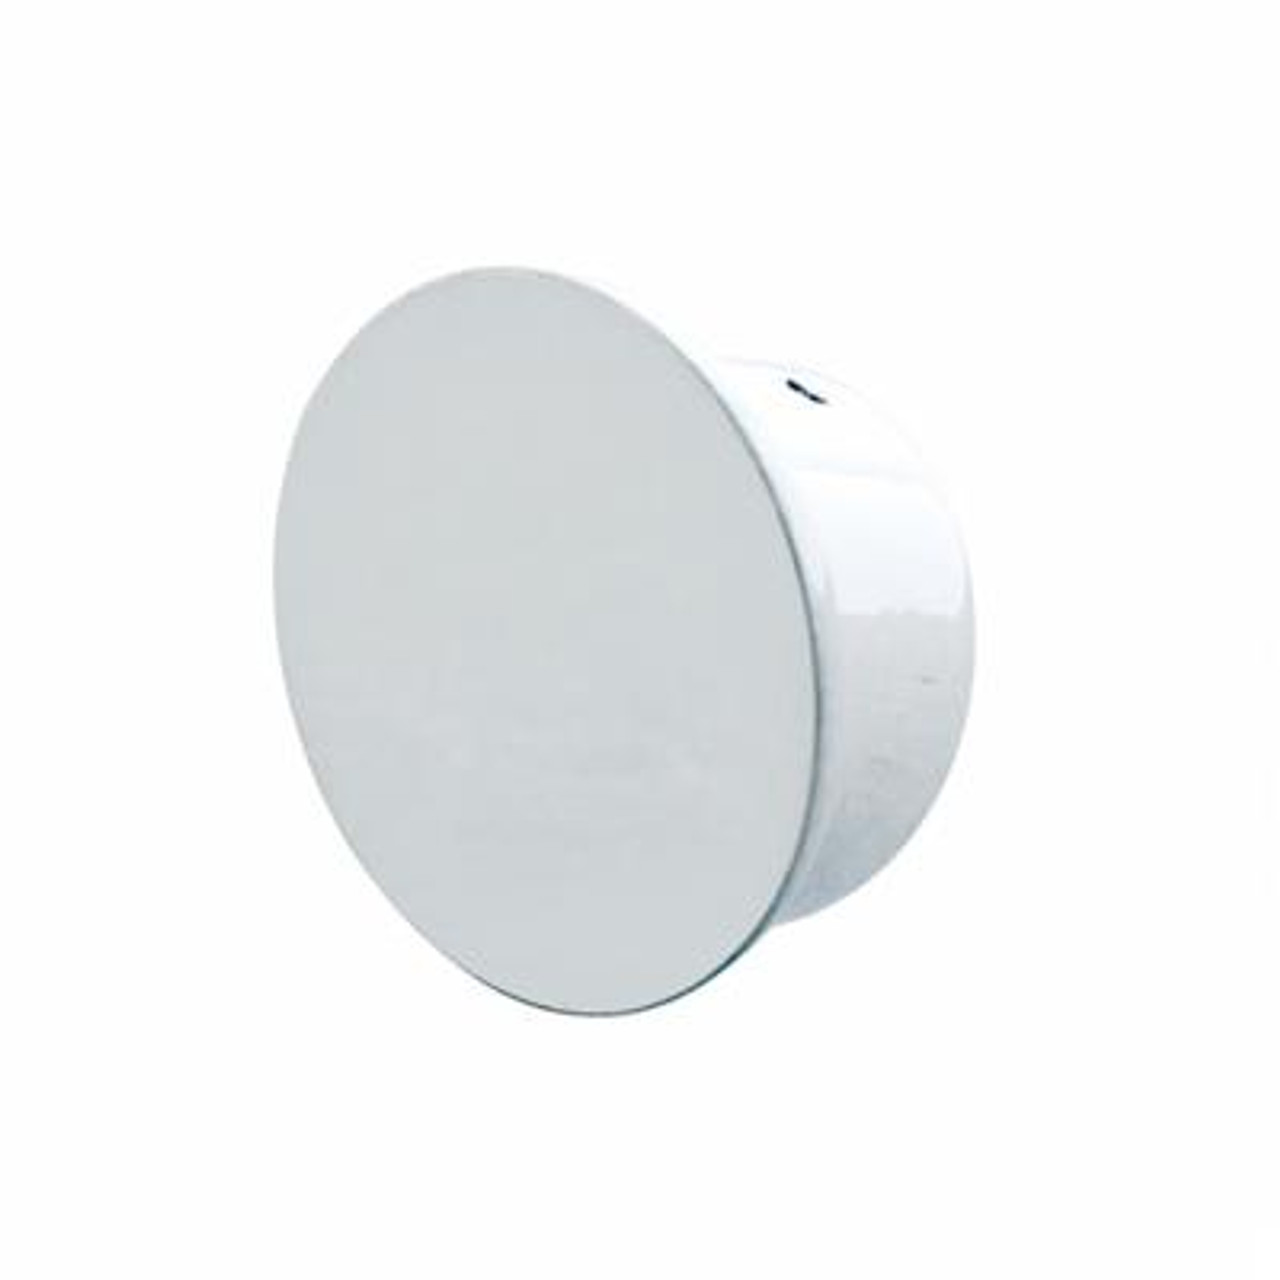 United Pacific offer a numerous amount of mirror assemblies for various applications. Other mirror accessories such as LED brackets, mounting brackets, and mirror covers are also available to order.